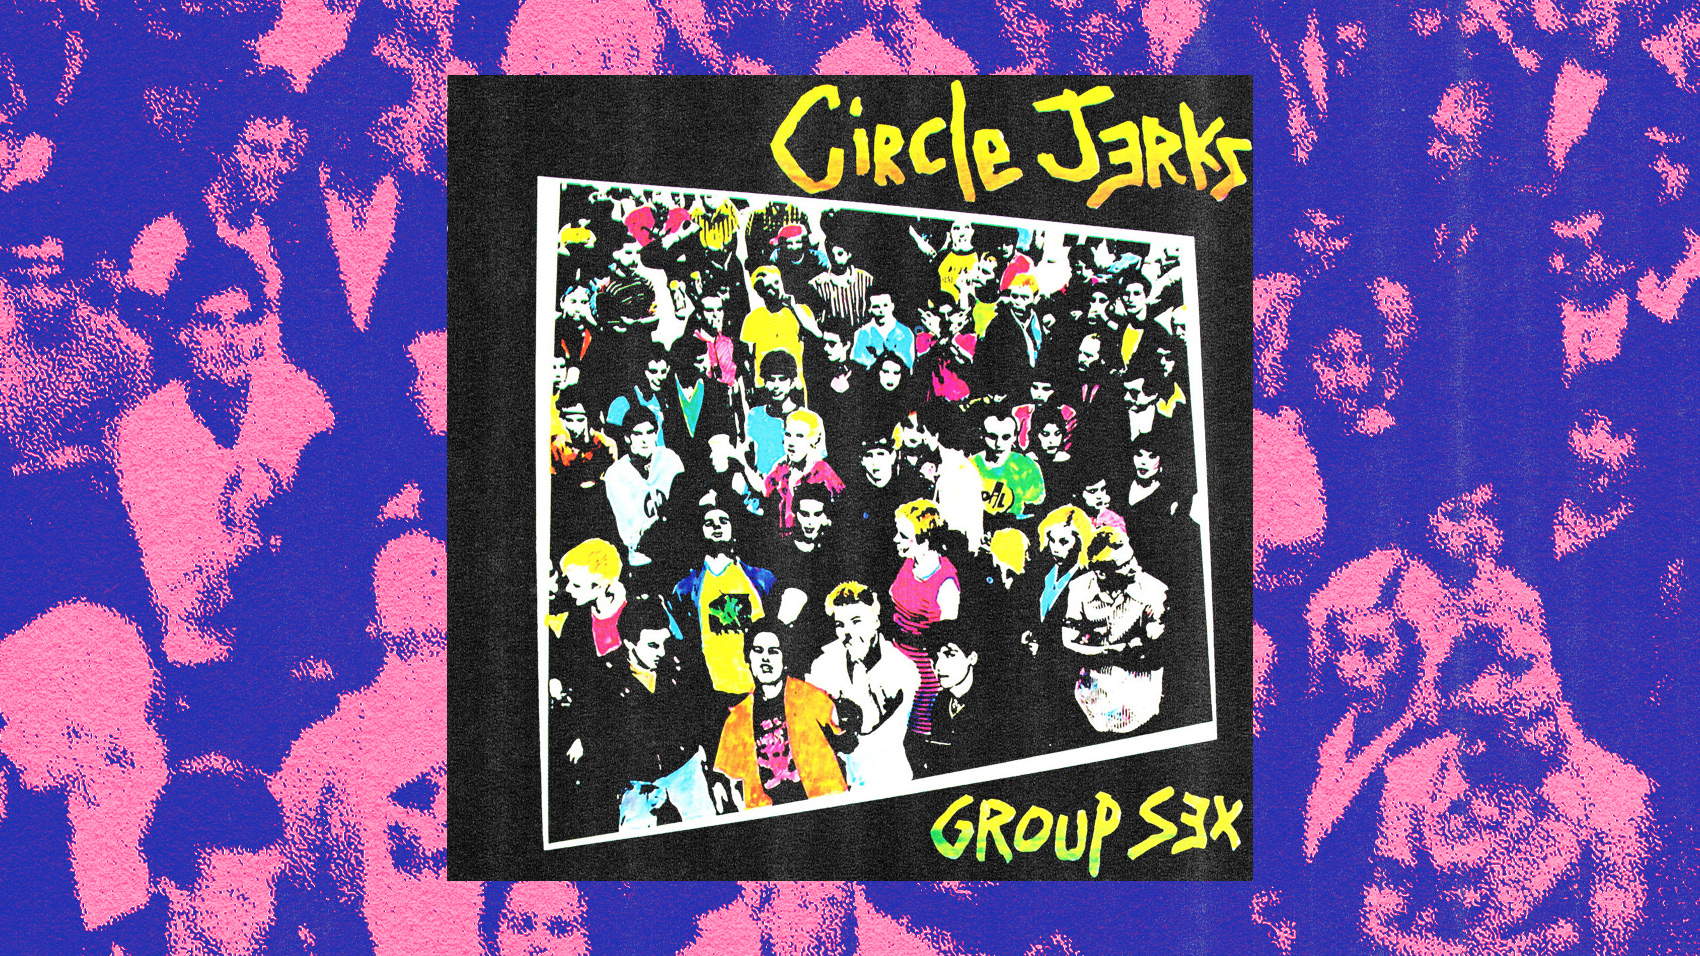 Group Sex Turns 40 An Oral History of Circle Jerks Debut photo